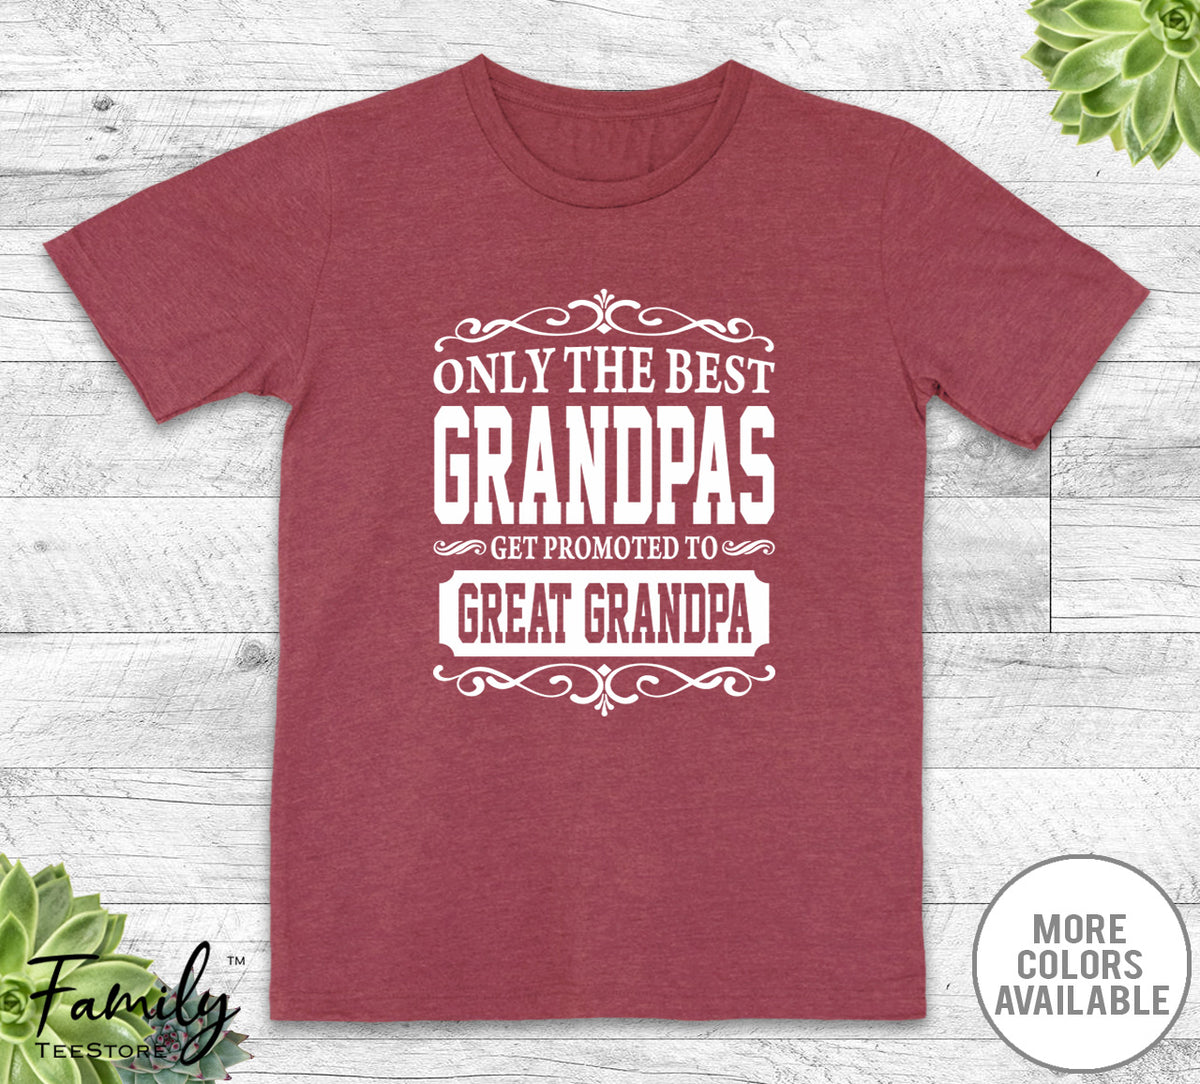 Only The Best Grandpas Get Promoted To Great Grandpa - Unisex T-shirt - Great Grandpa Shirt - Great Grandpa Gift - familyteeprints